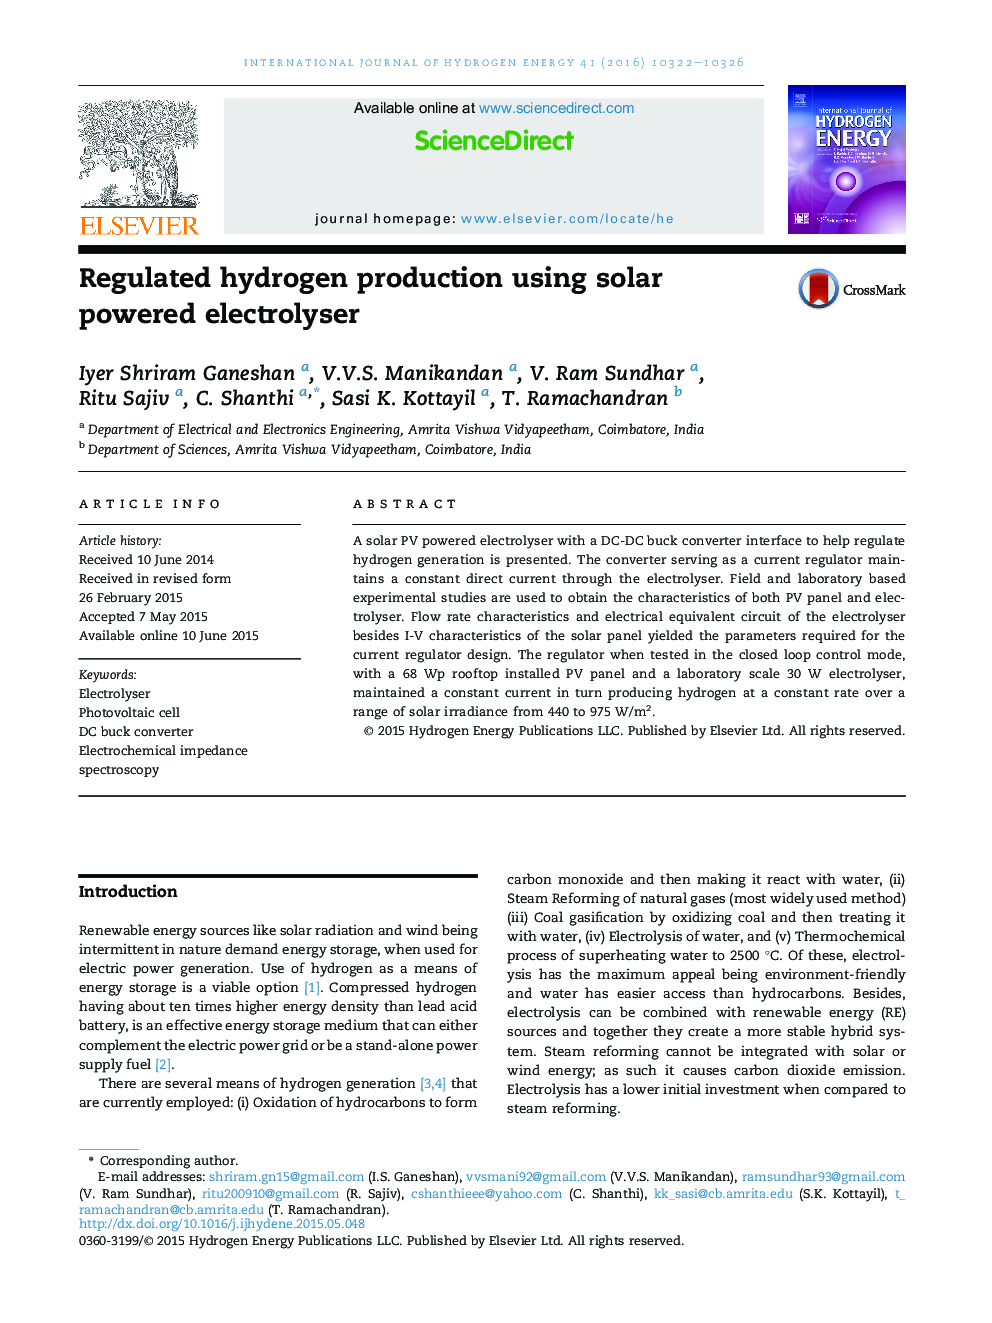 Regulated hydrogen production using solar powered electrolyser